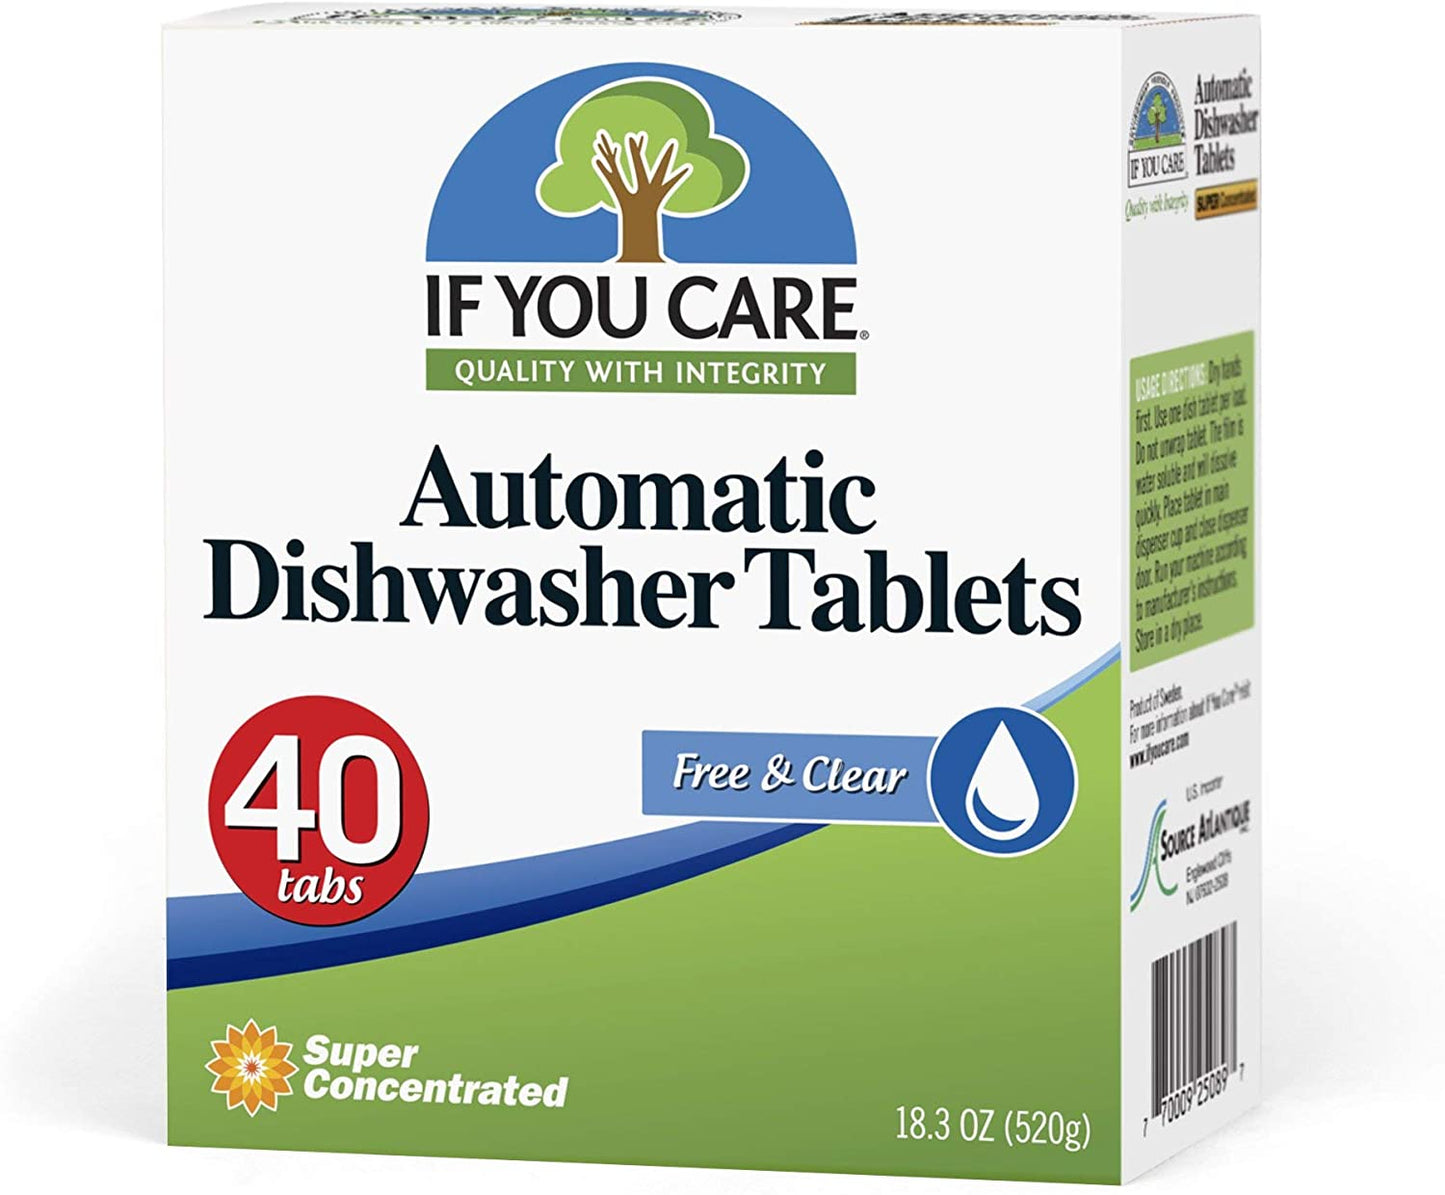 IF YOU CARE Automatic Dishwasher Tablets, 40 Count